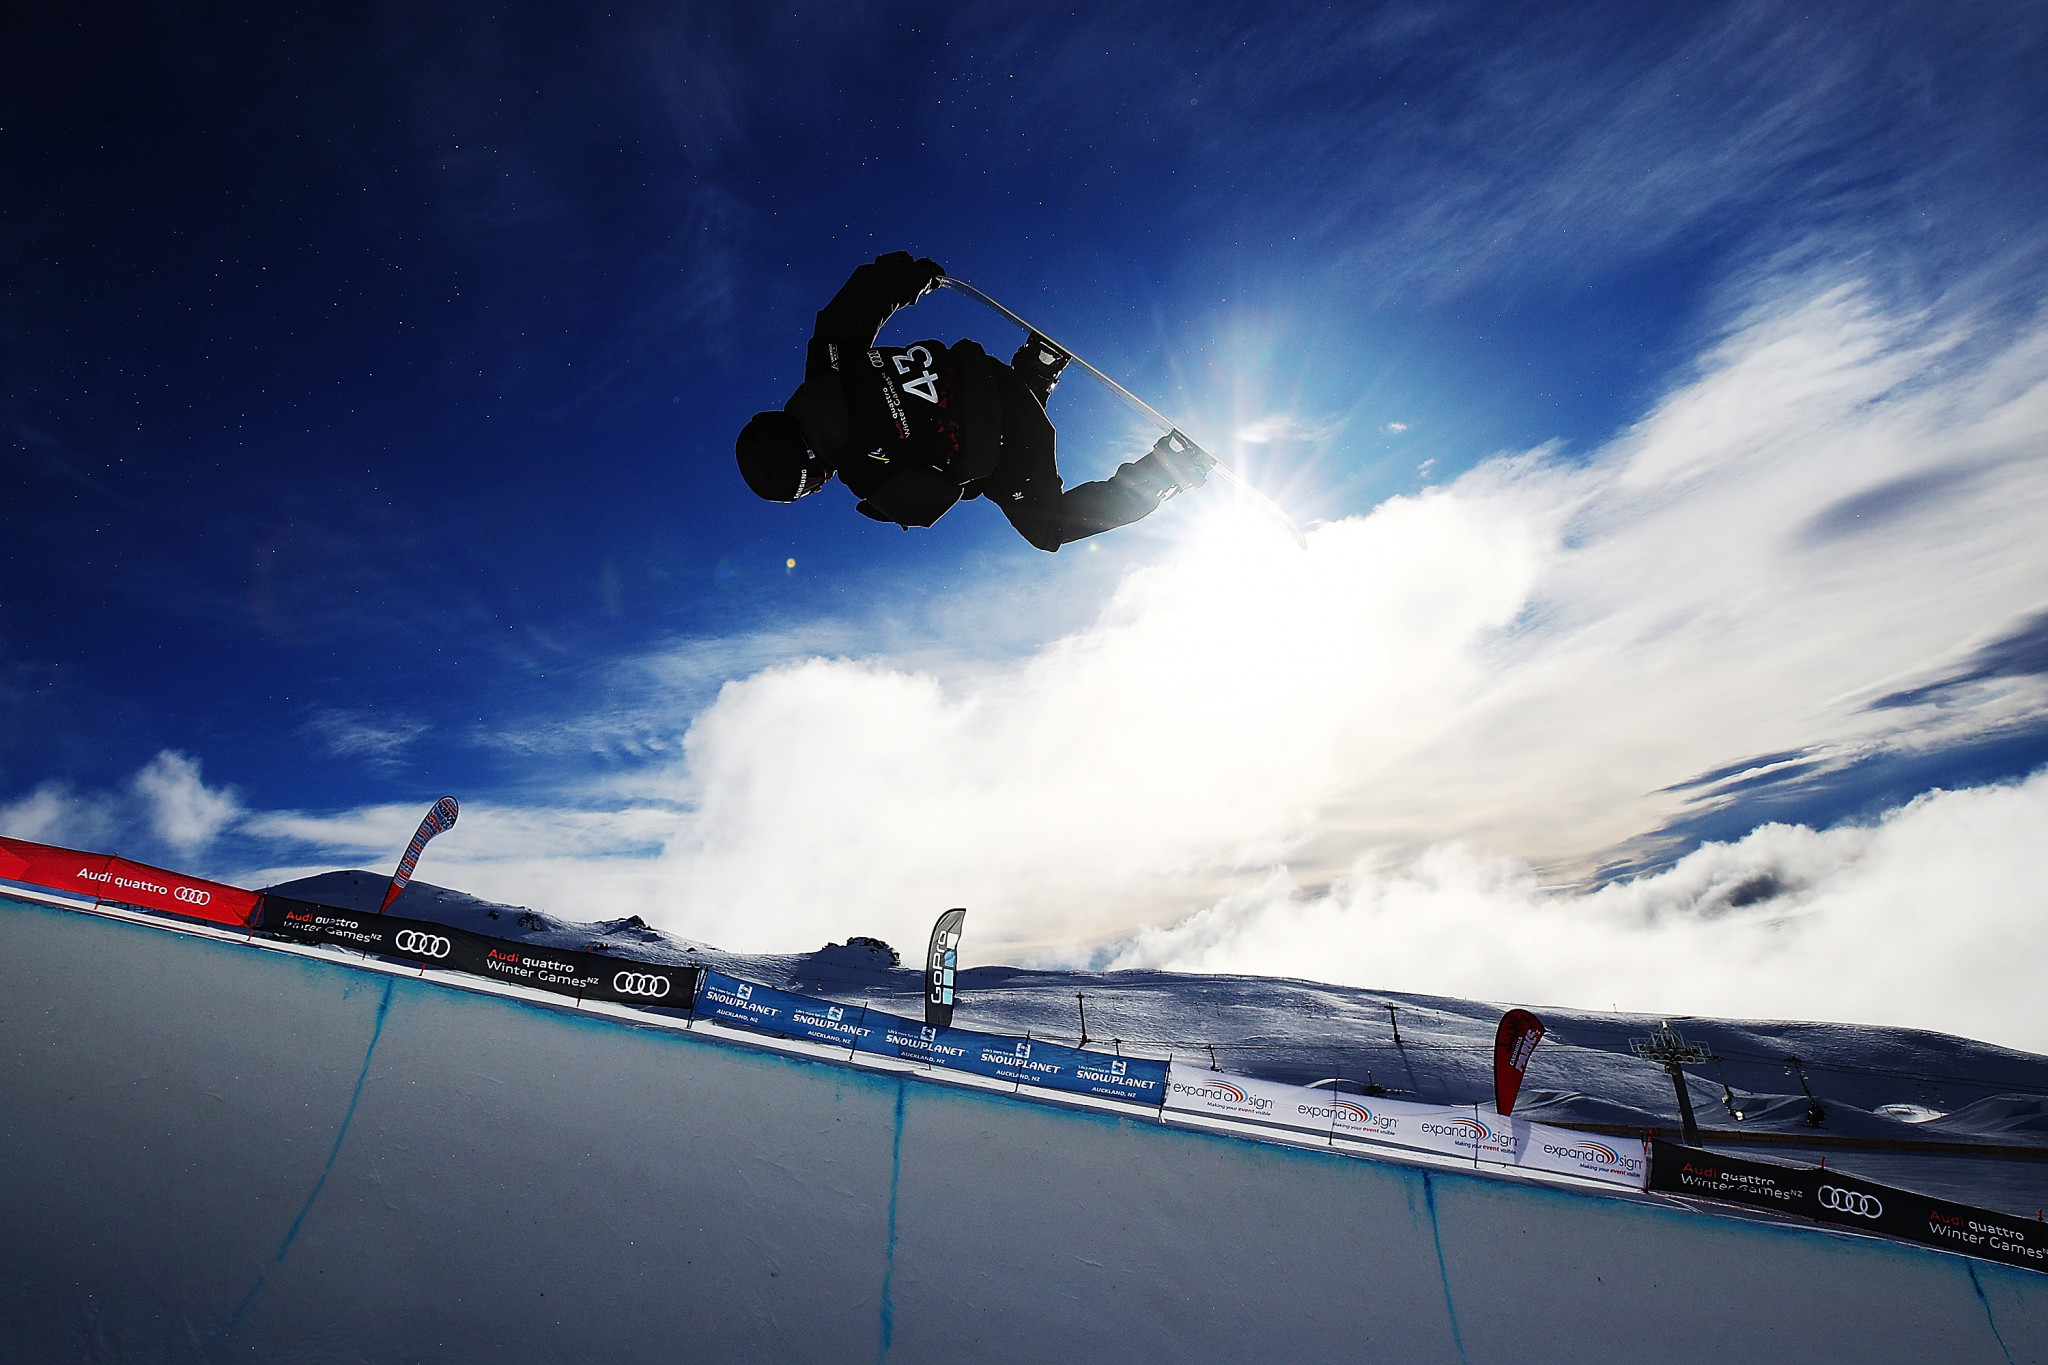 New Zealand will host the International Ski Federation Junior Freestyle Ski and Snowboard World Championships from tomorrow ©Getty Images